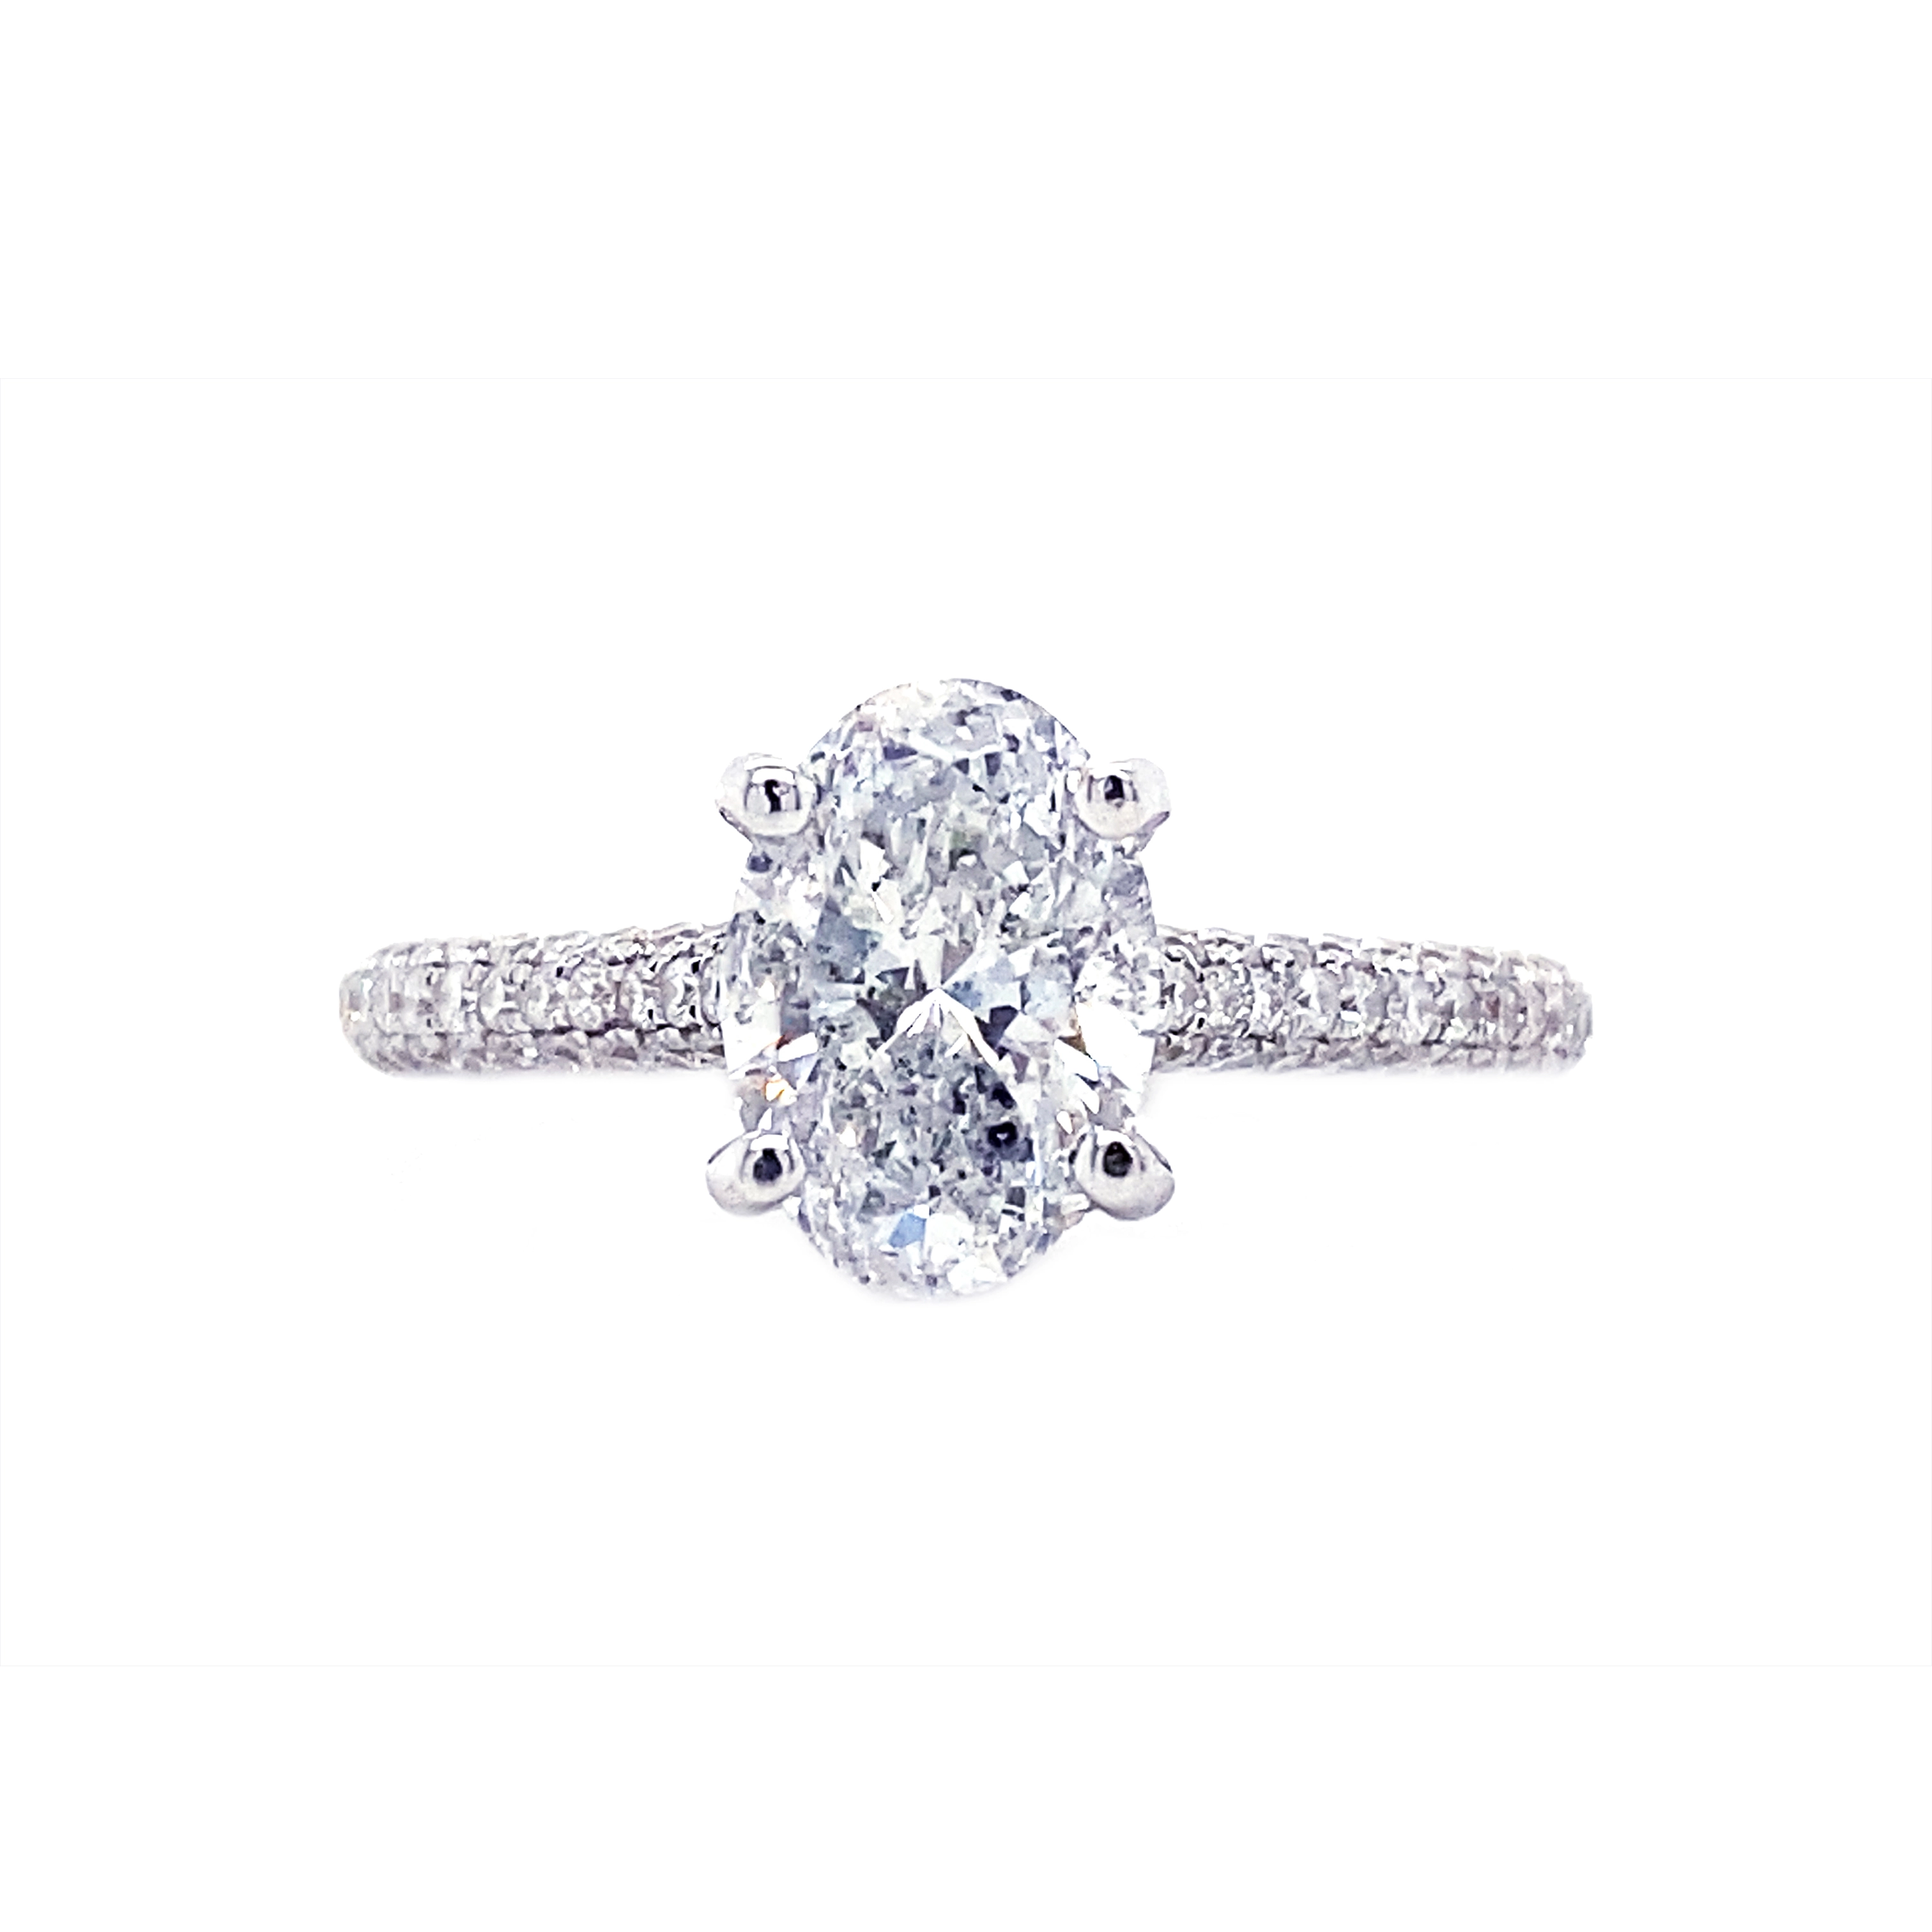 Oval Cluster Diamond Ring: Benefits of Choosing the Right Size